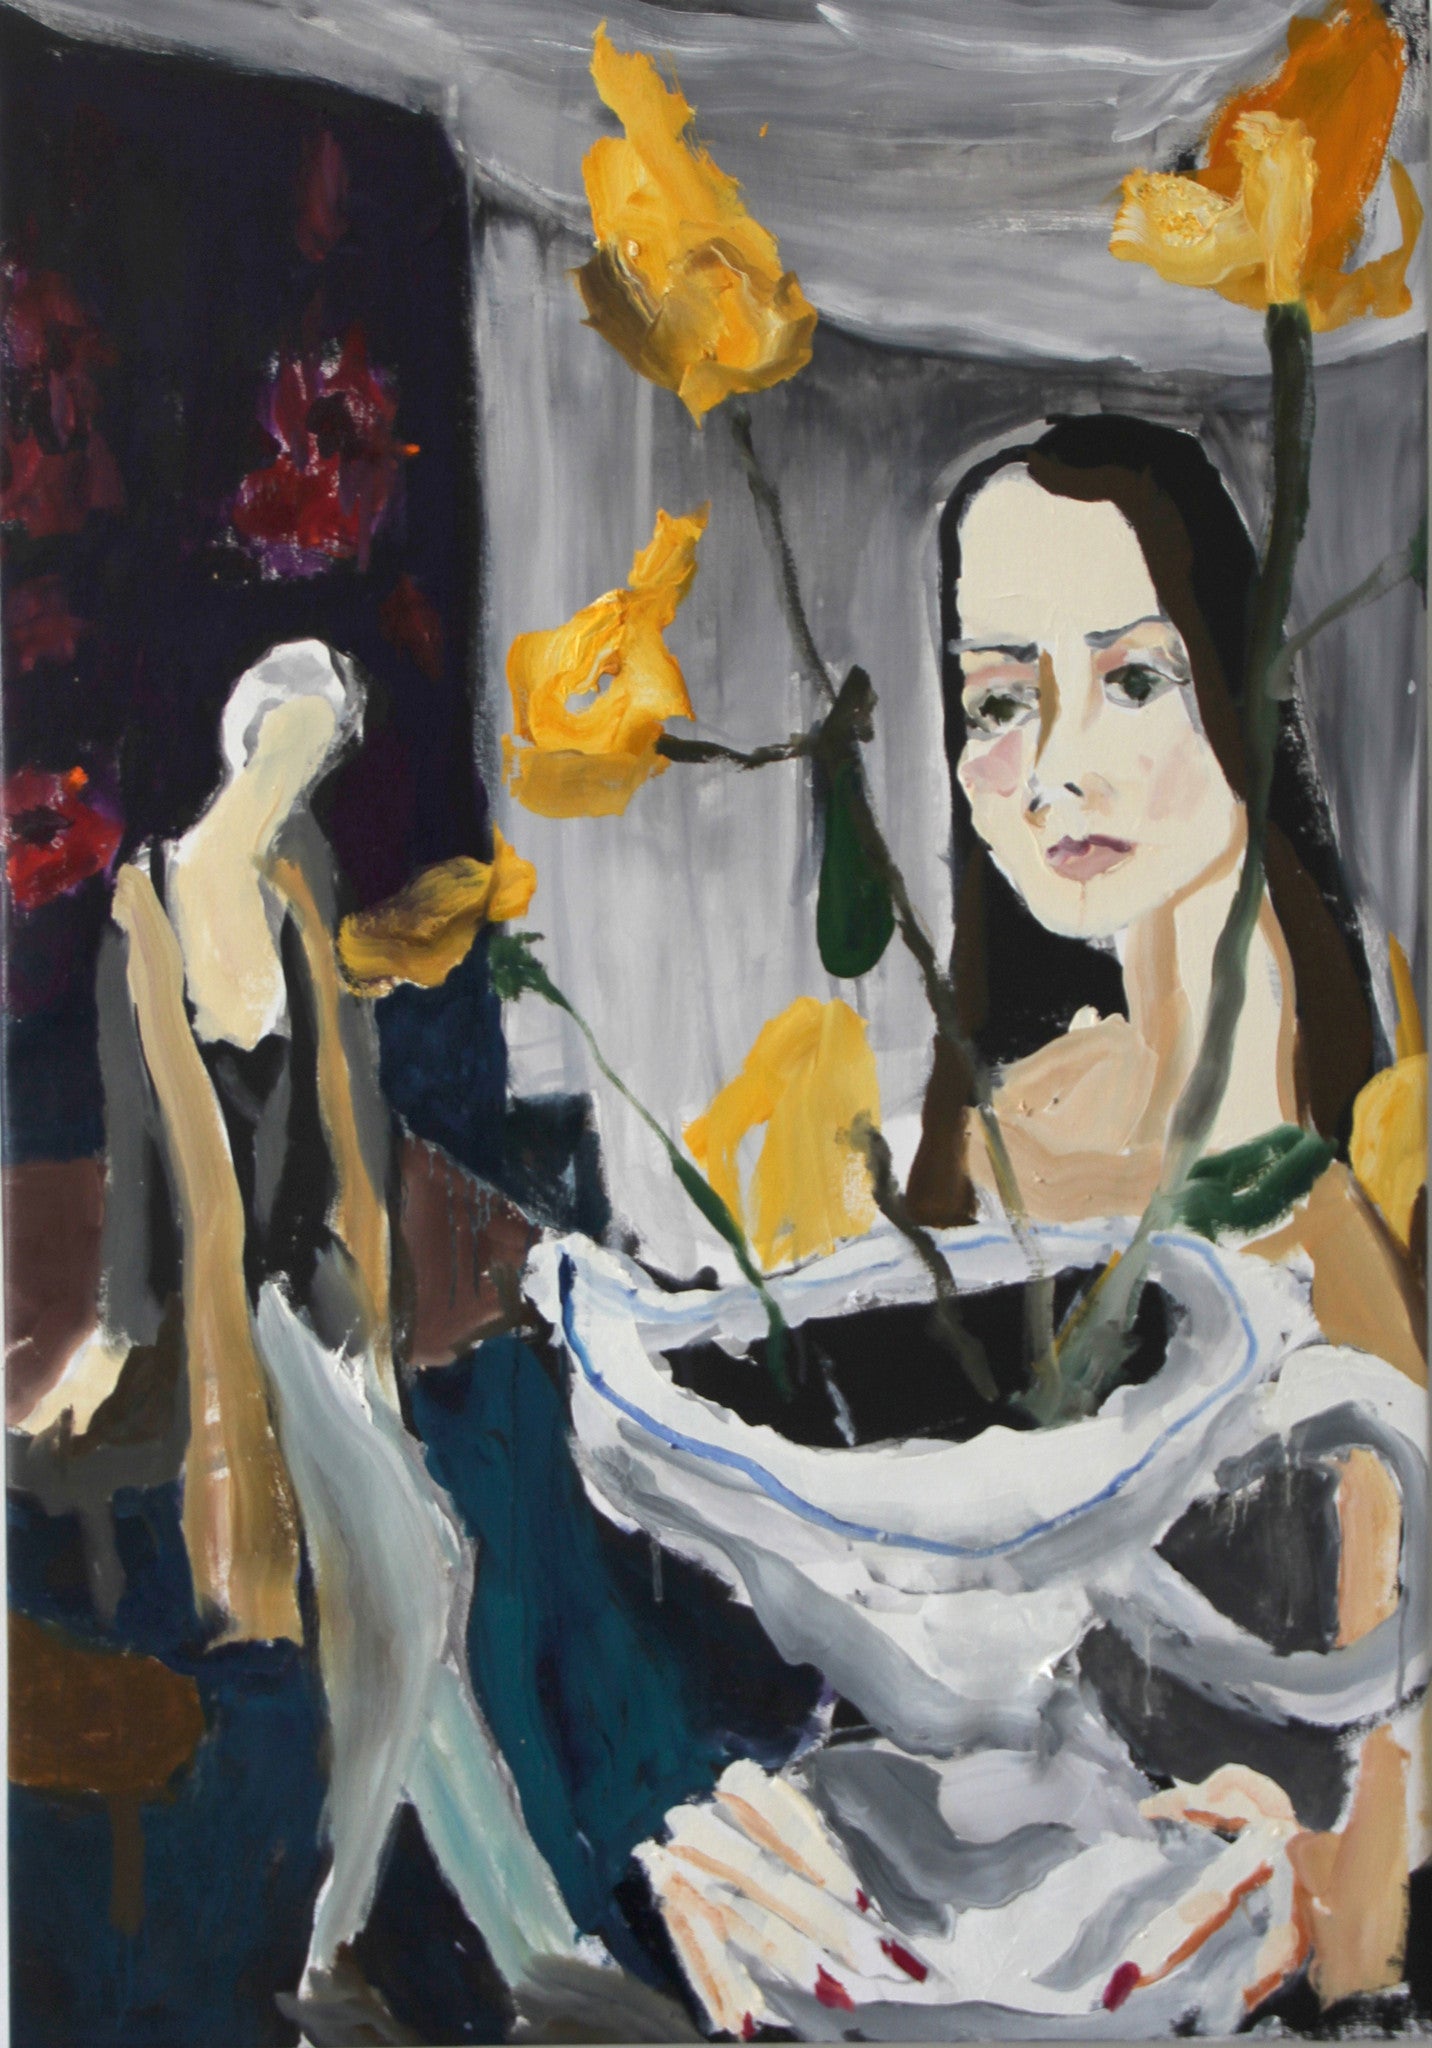  Flowers for Soutine, a painting by NYC based artist Bradley Wood.